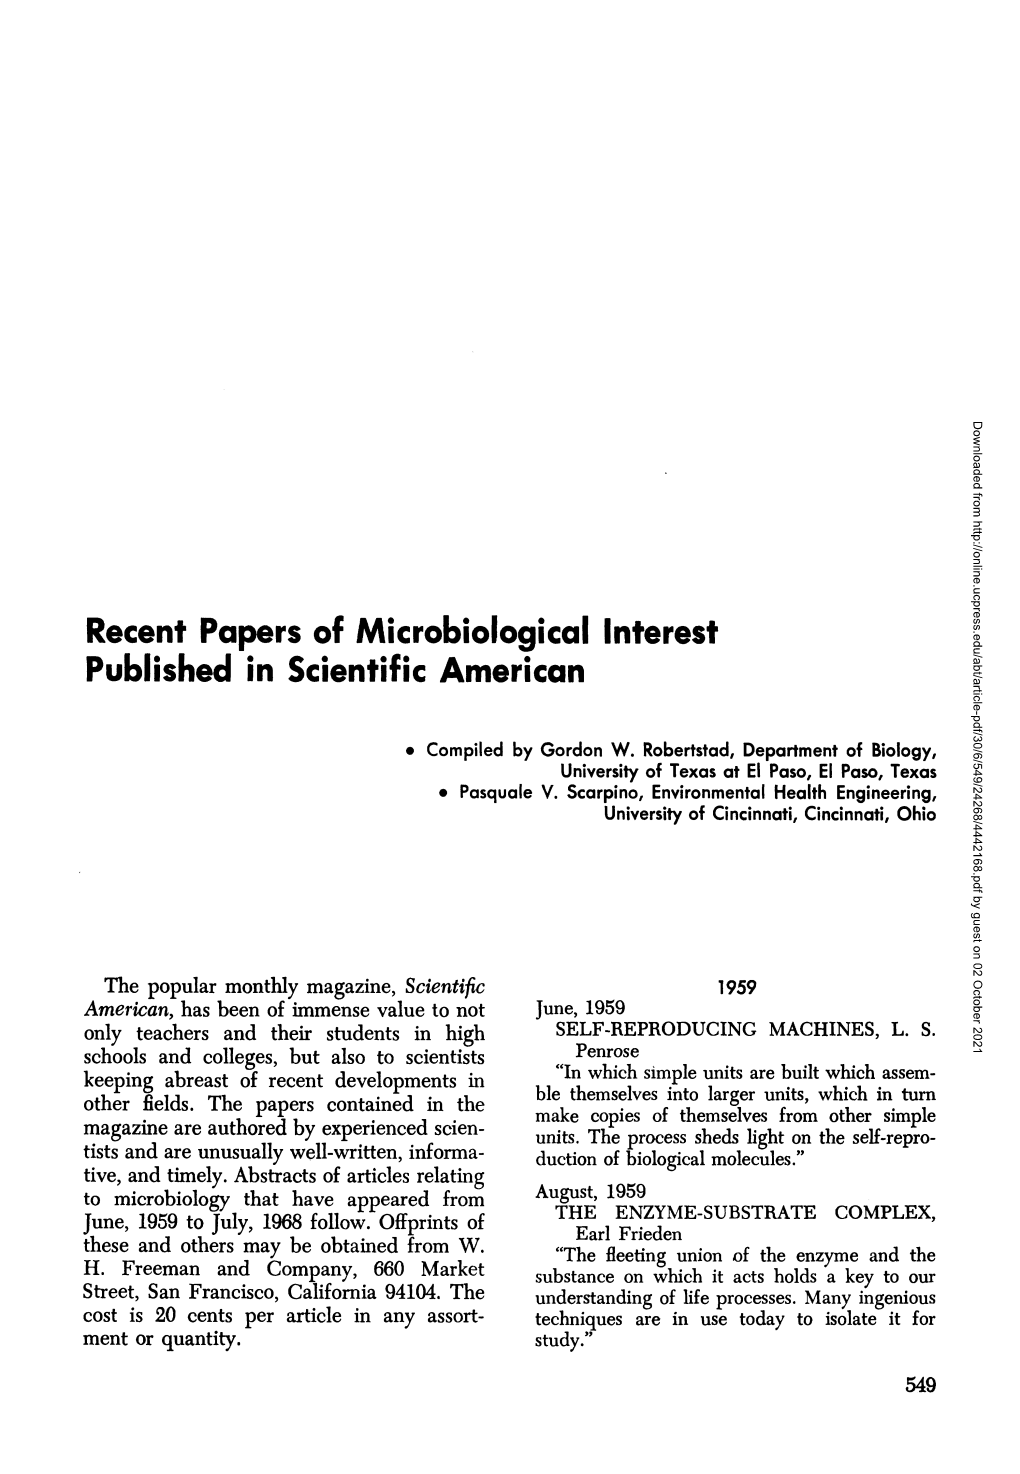 Recent Papers of Microbiological Interest Published in Scientific